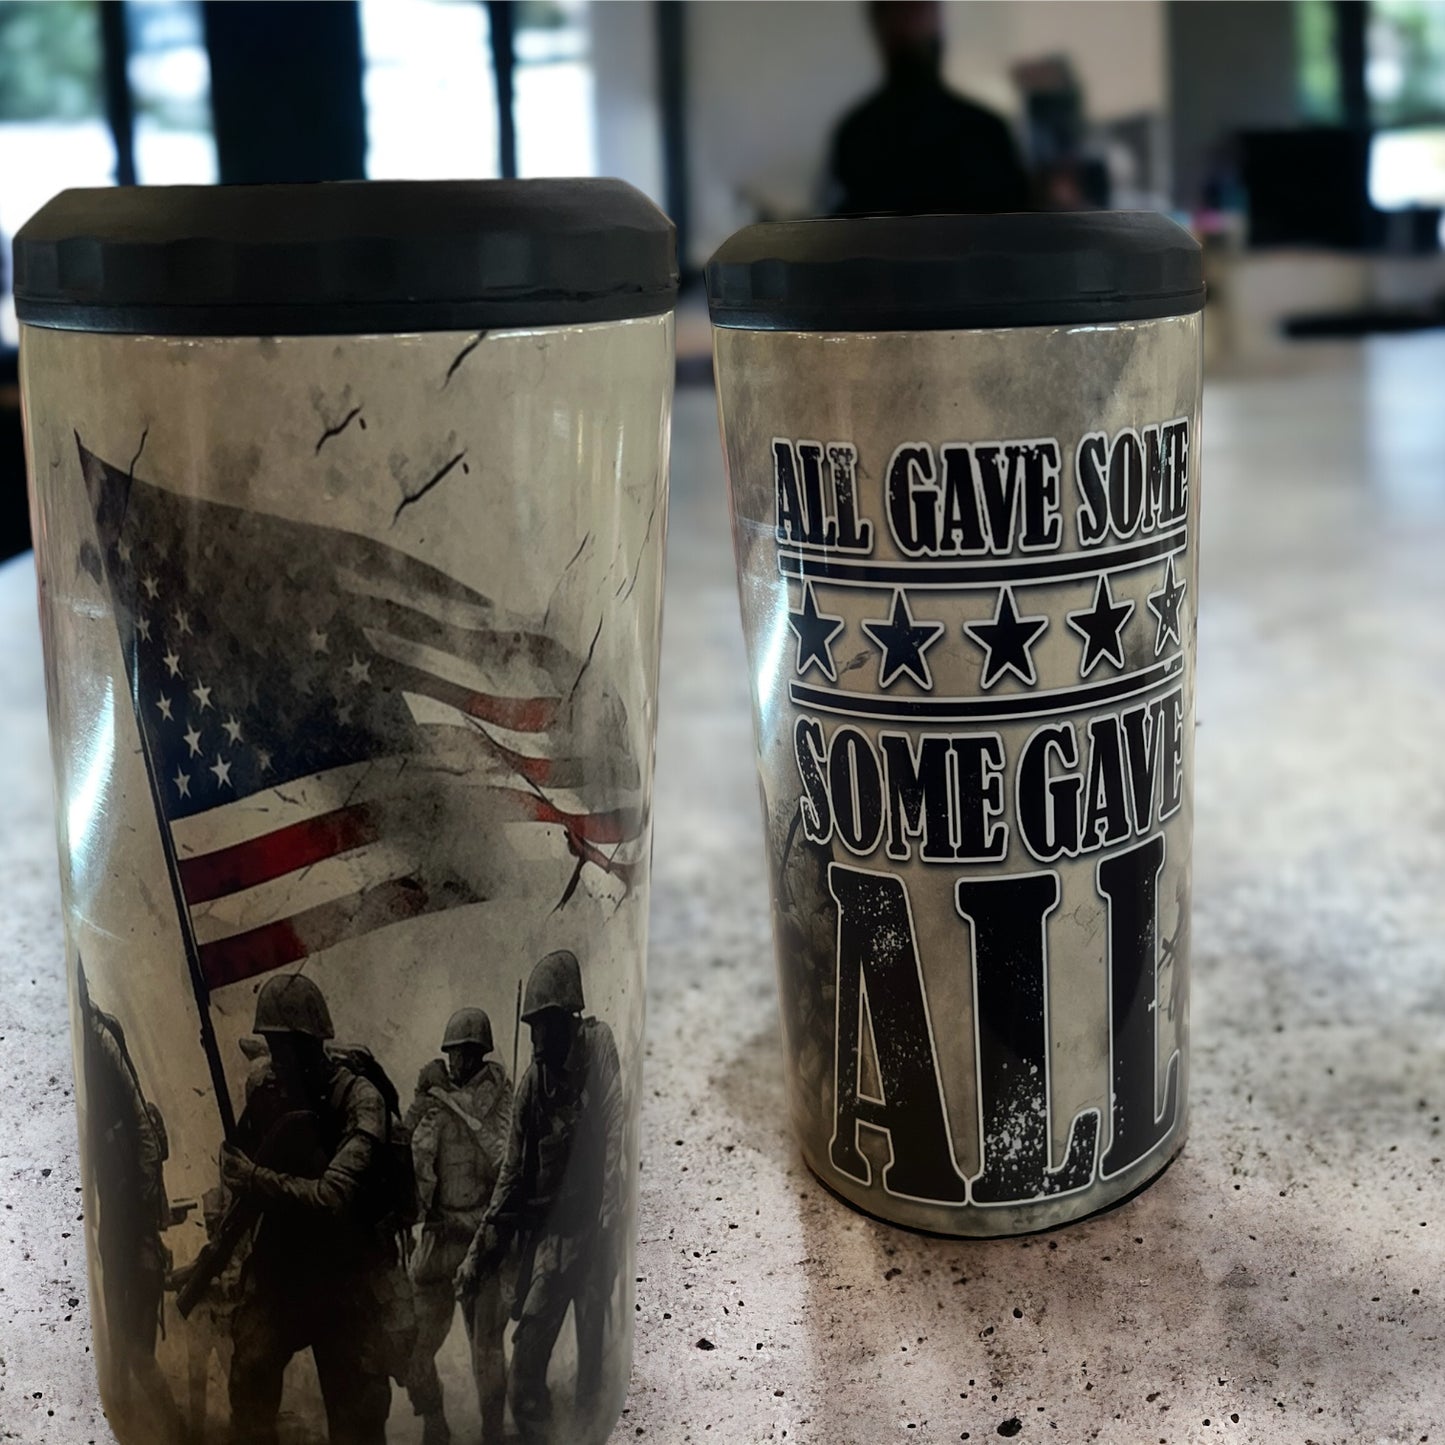 4 in 1 Bottle and Can Holder and Tumbler 16oz - all gave some, and some gave all ￼